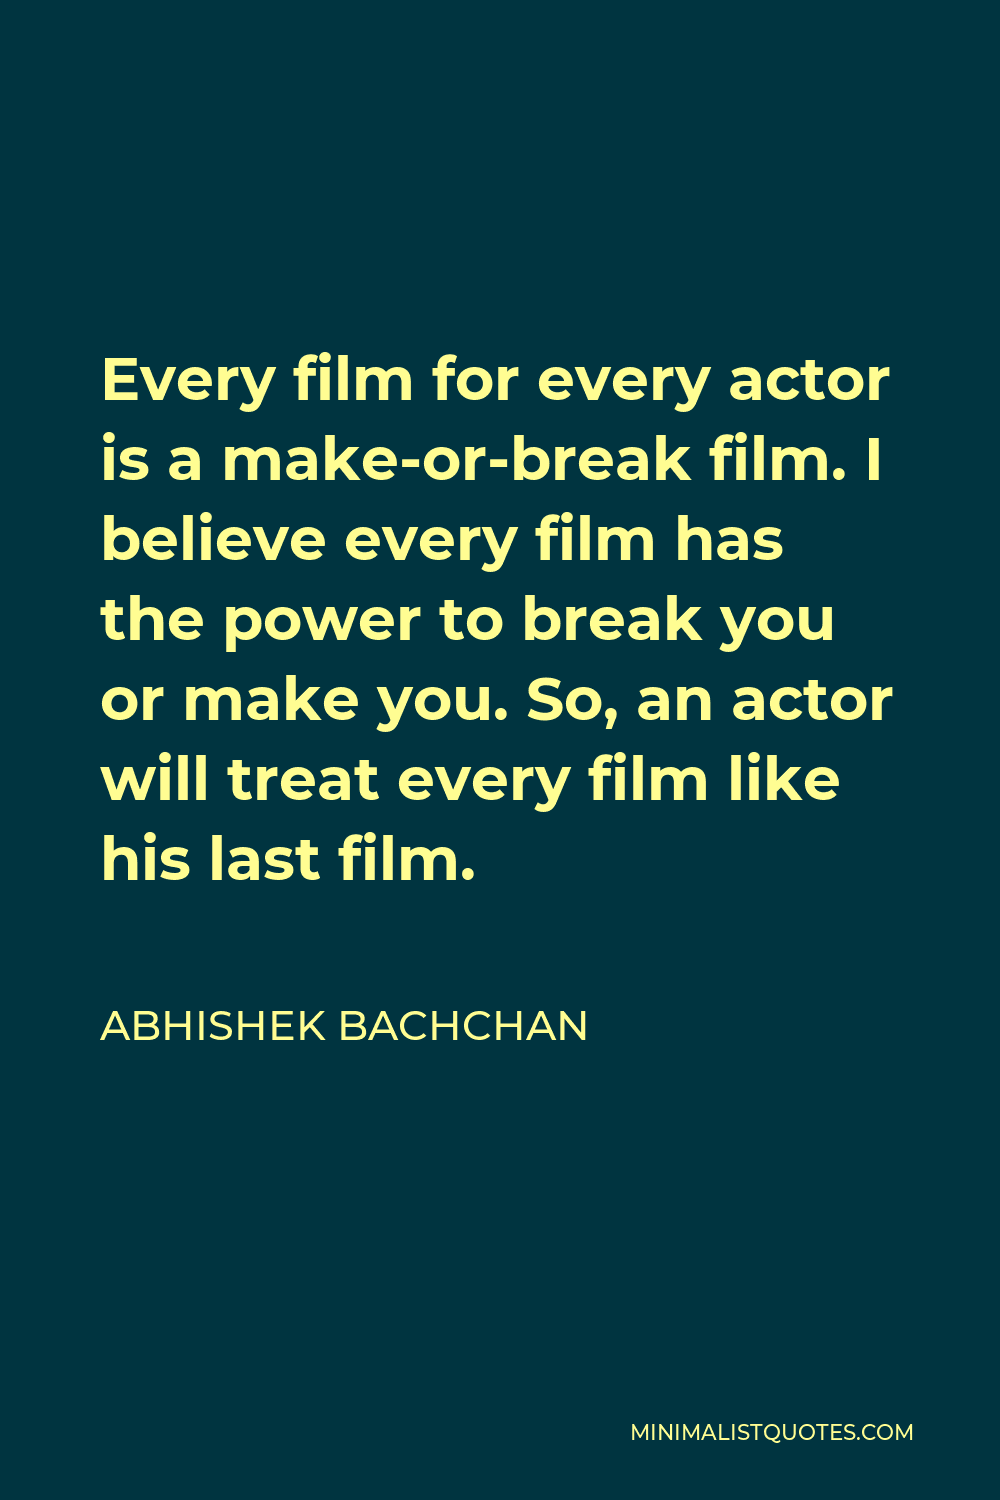 Abhishek Bachchan Quote - Every film for every actor is a make-or-break film. I believe every film has the power to break you or make you. So, an actor will treat every film like his last film.